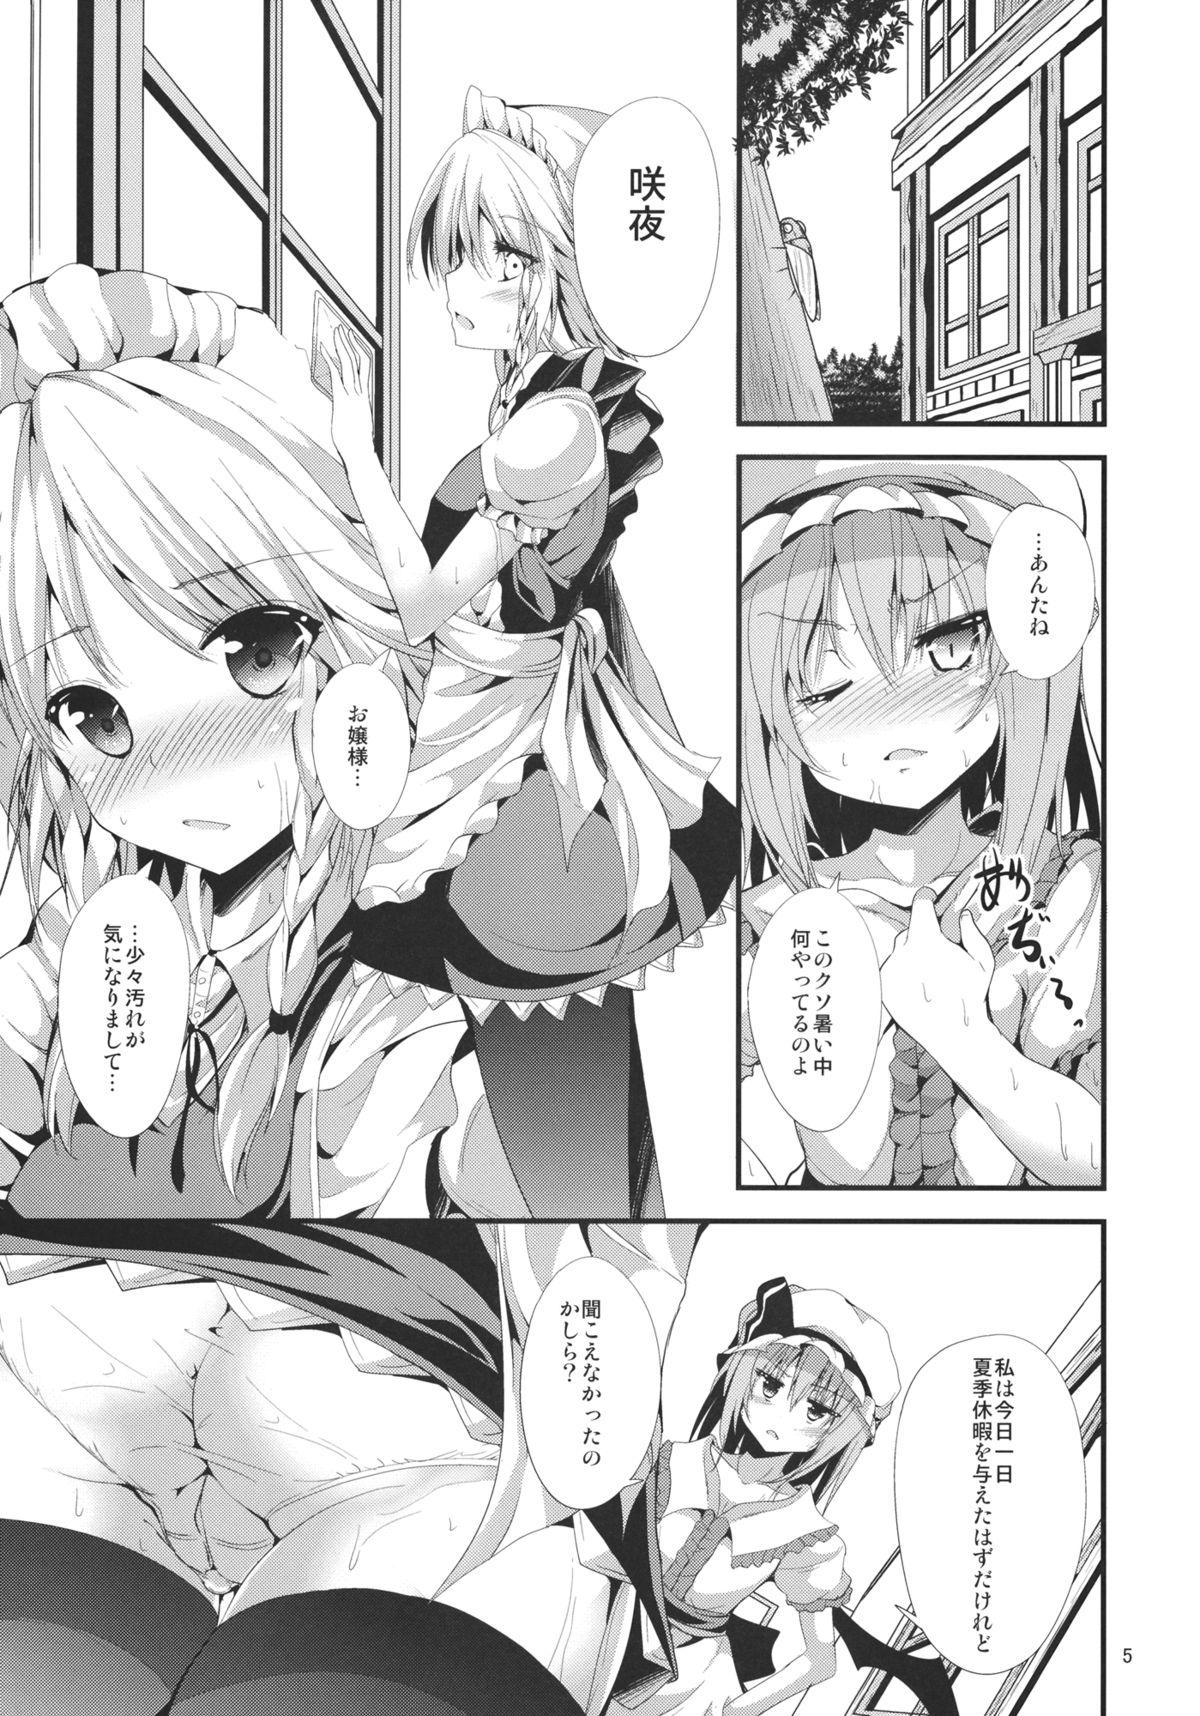 Shorts Summer vacation - Touhou project Amateur Porn Free - Page 2